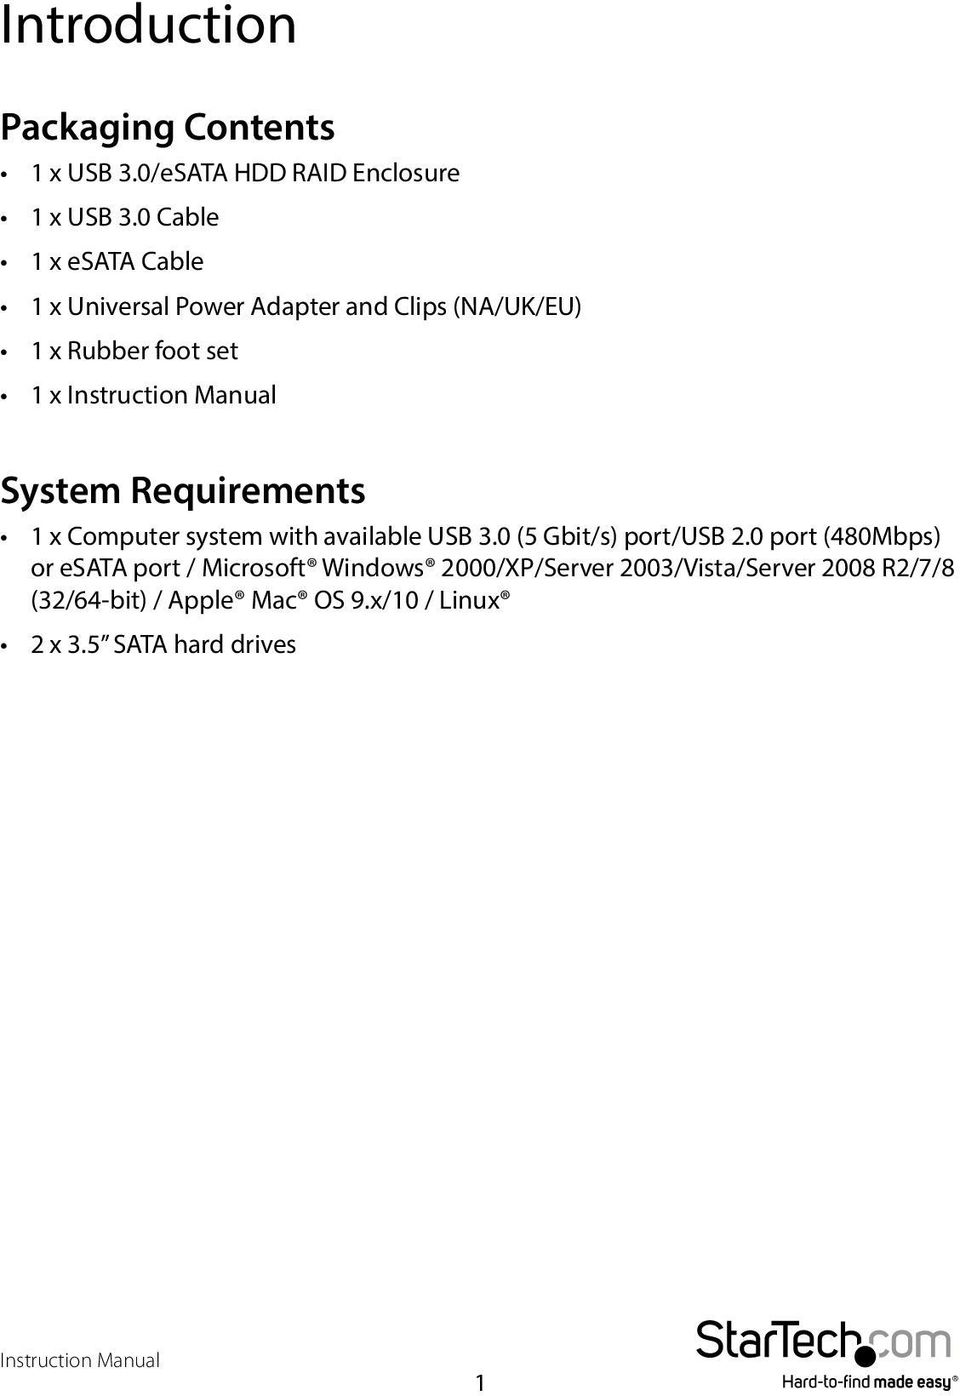 Requirements 1 x Computer system with available USB 3.0 (5 Gbit/s) port/usb 2.